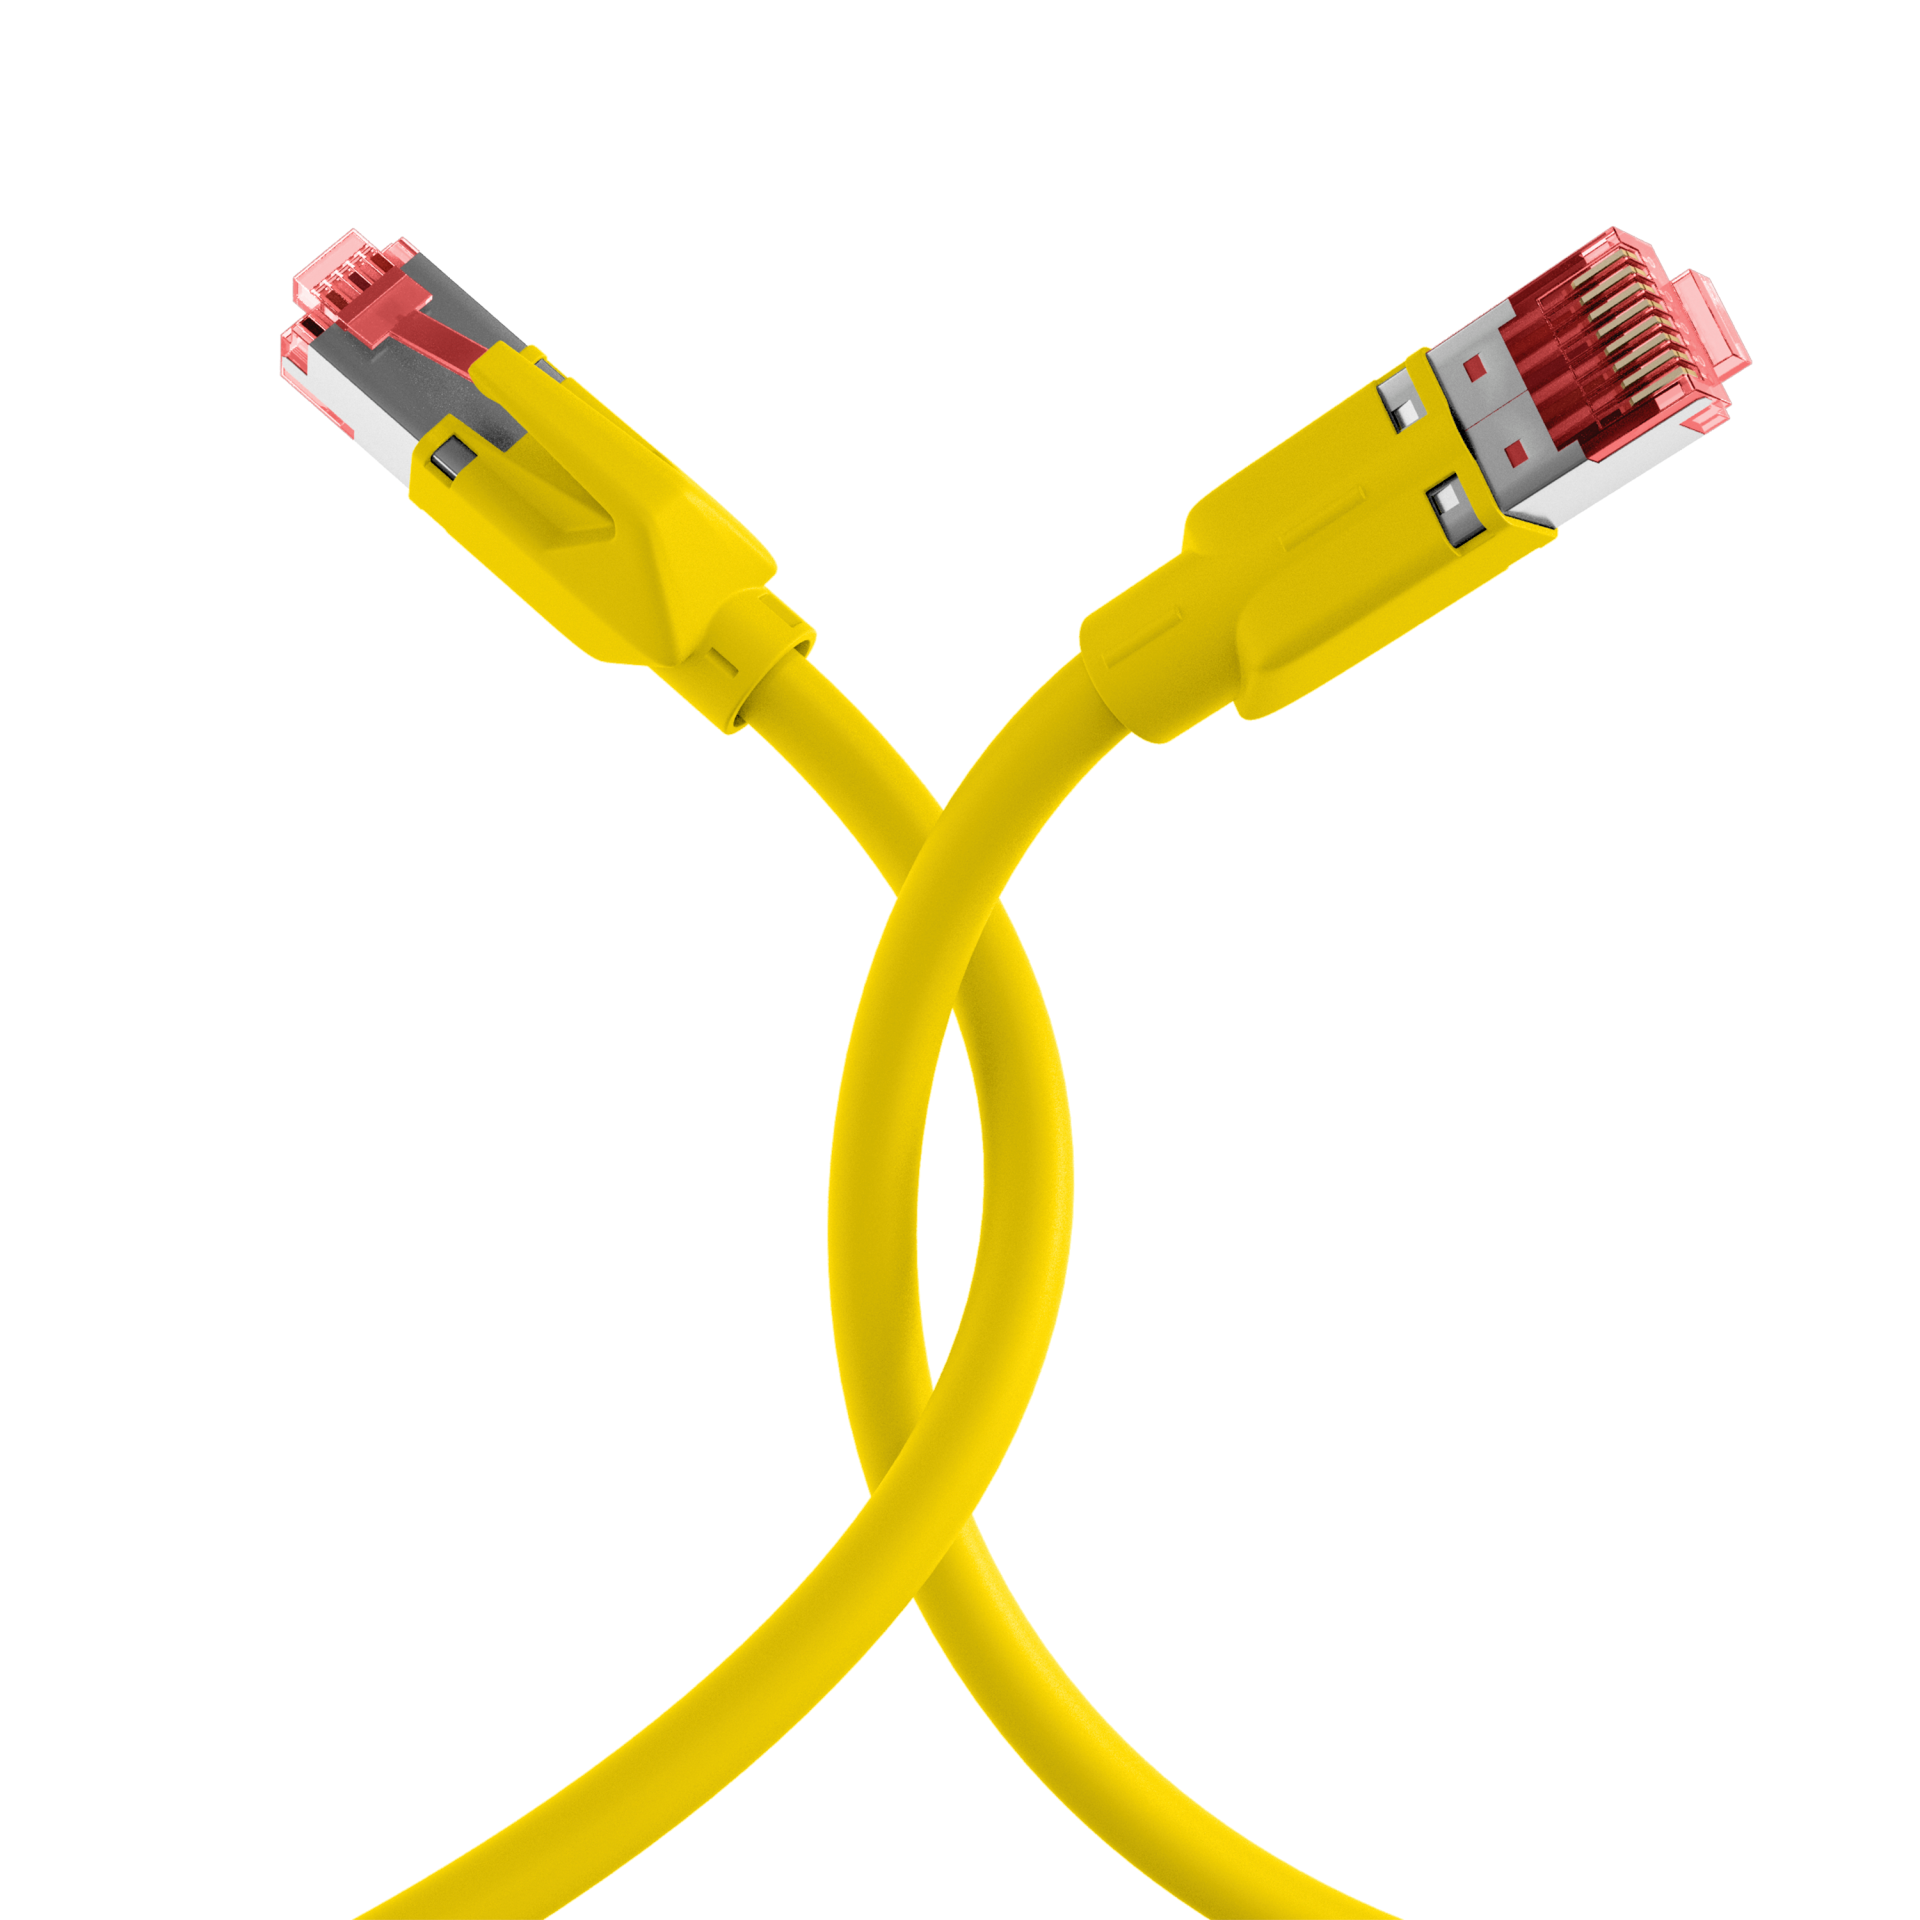 RJ45 Patch Cord Cat.5e S/UTP PUR TM21 for drag chains yellow 20m